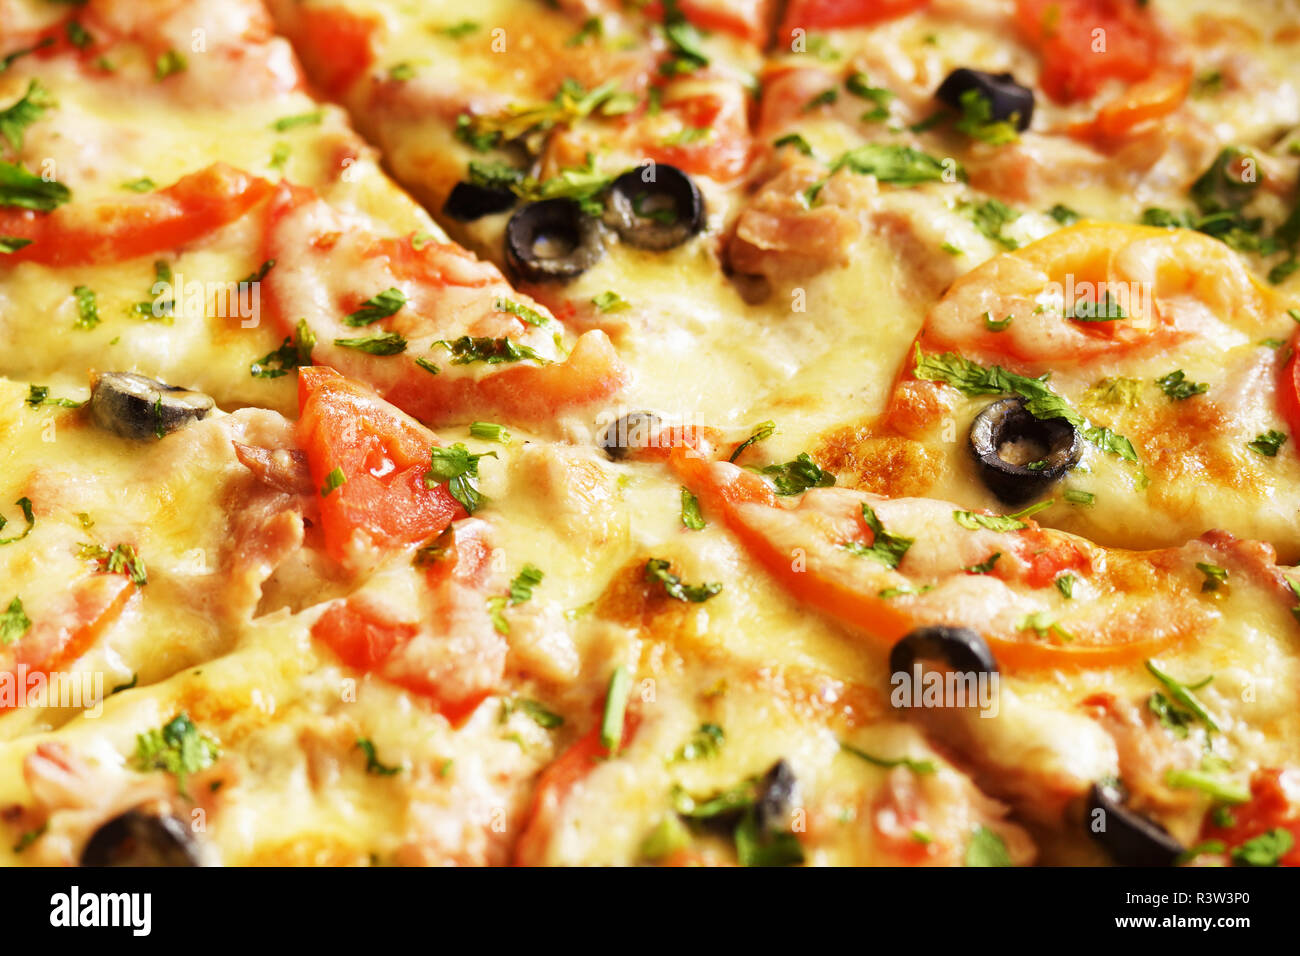 Hot pizza with cheese, ham and chicken, fresh tomato slices and olives cutted to pieces. Could be used as food background or in restaurant menu Stock Photo